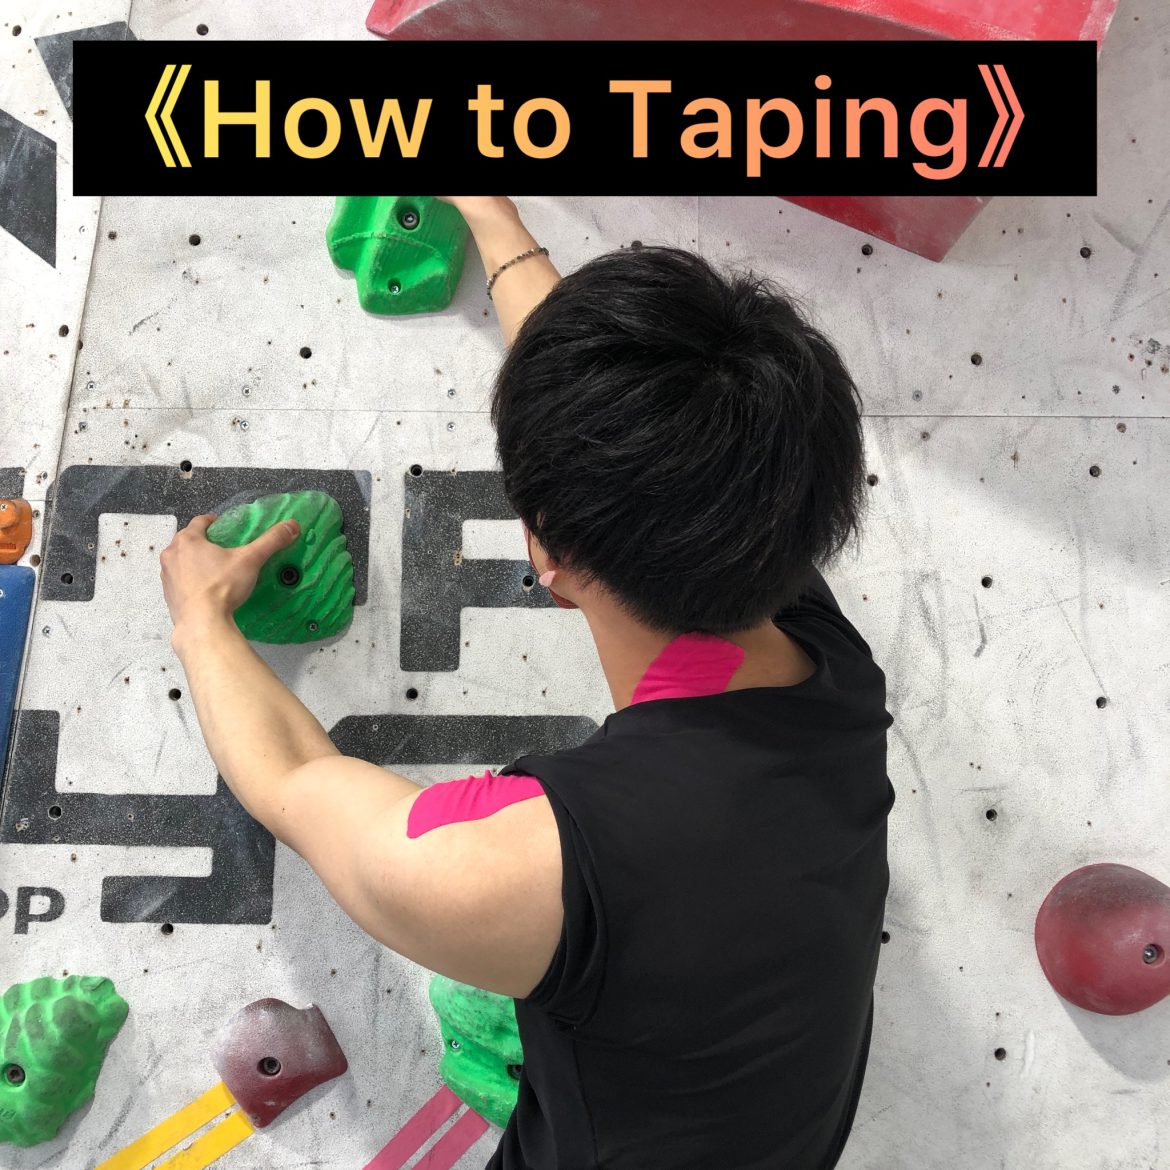 How to Taping Vol.4